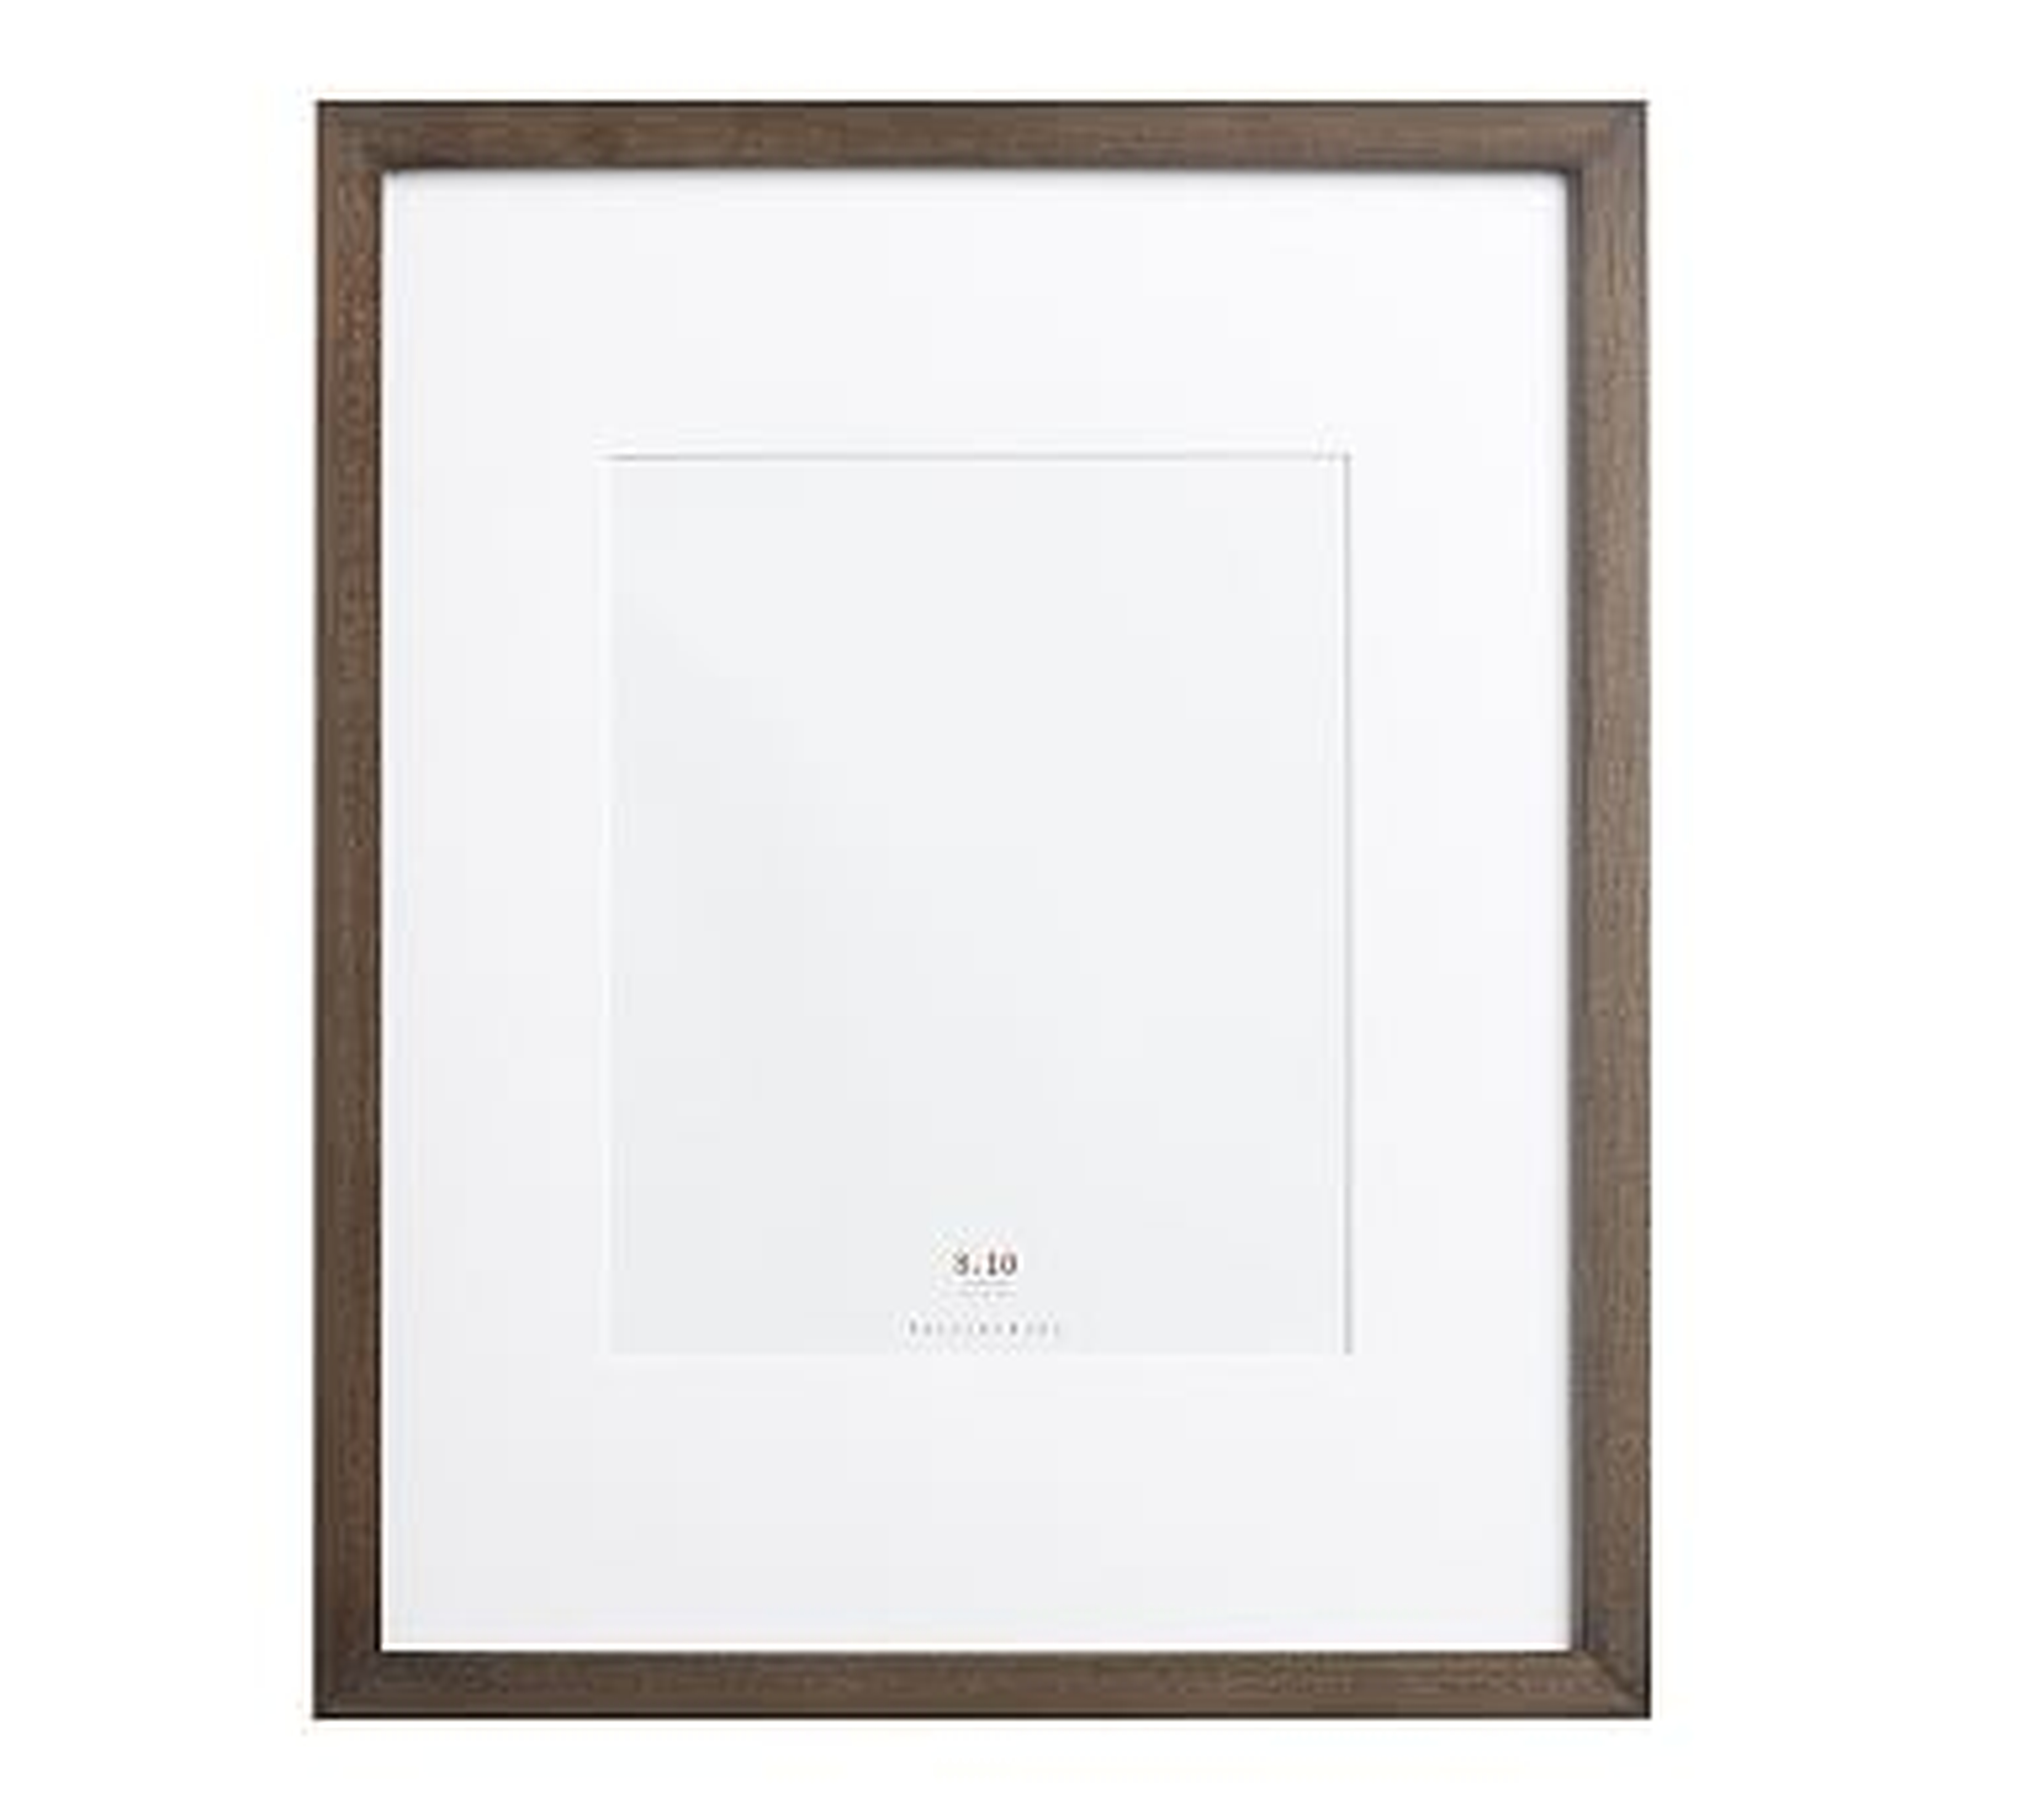 Wood Gallery Single Opening Frame, Charcoal / 8"x10" - Pottery Barn